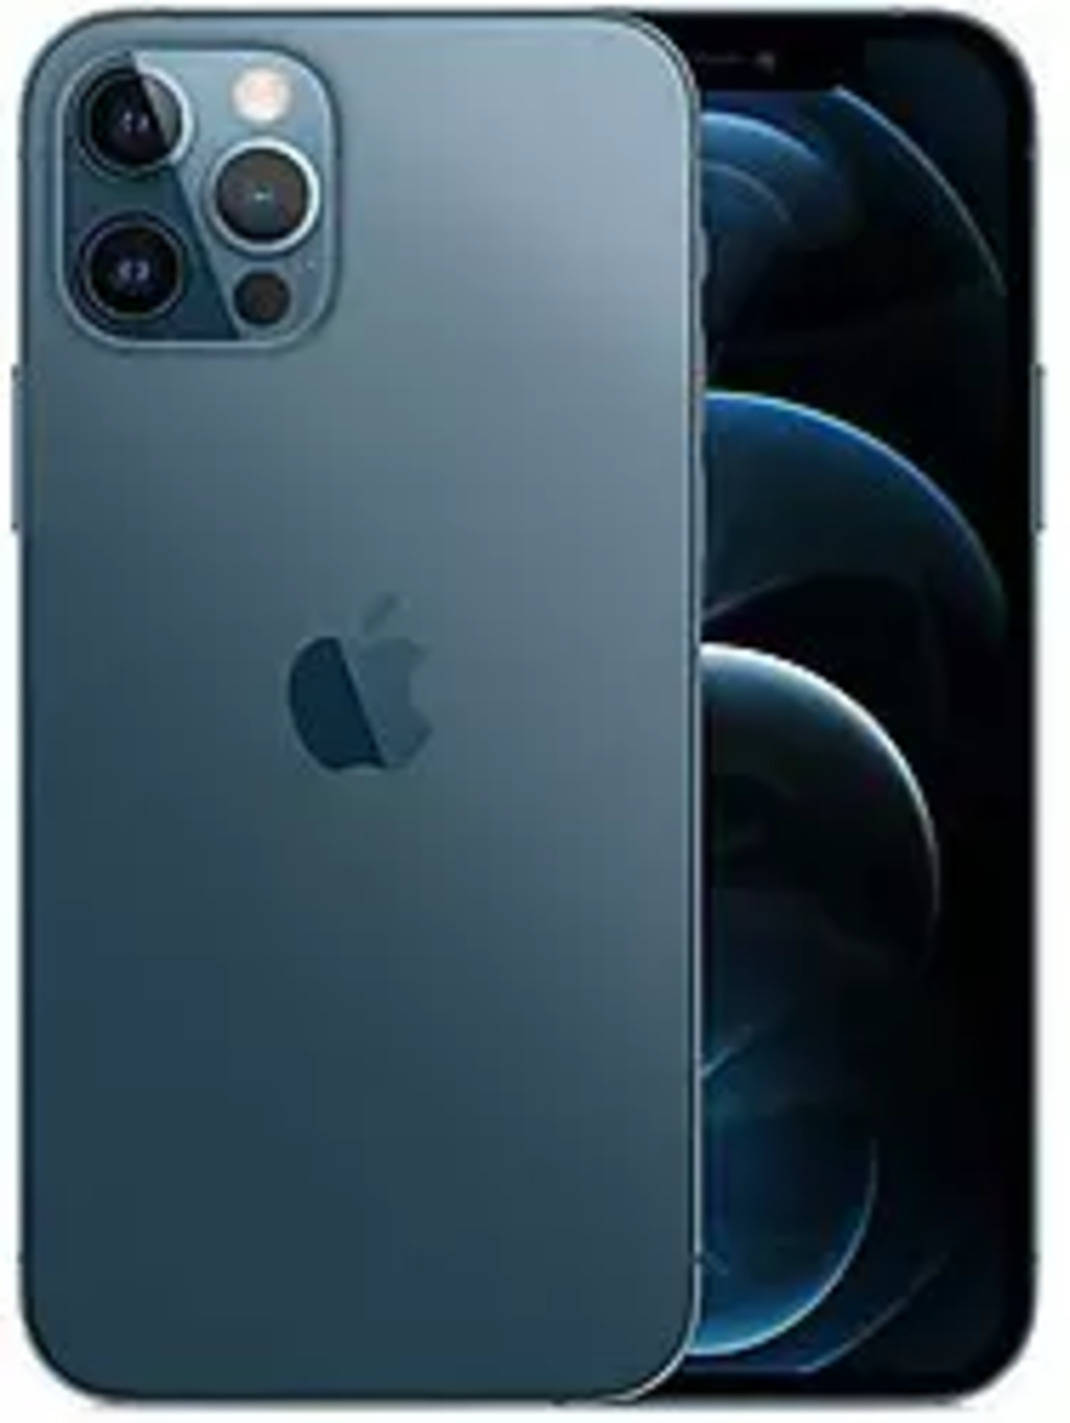 Compare Apple Iphone 12 Pro Vs Apple Iphone 12 Pro Max Price Specs Review Gadgets Now